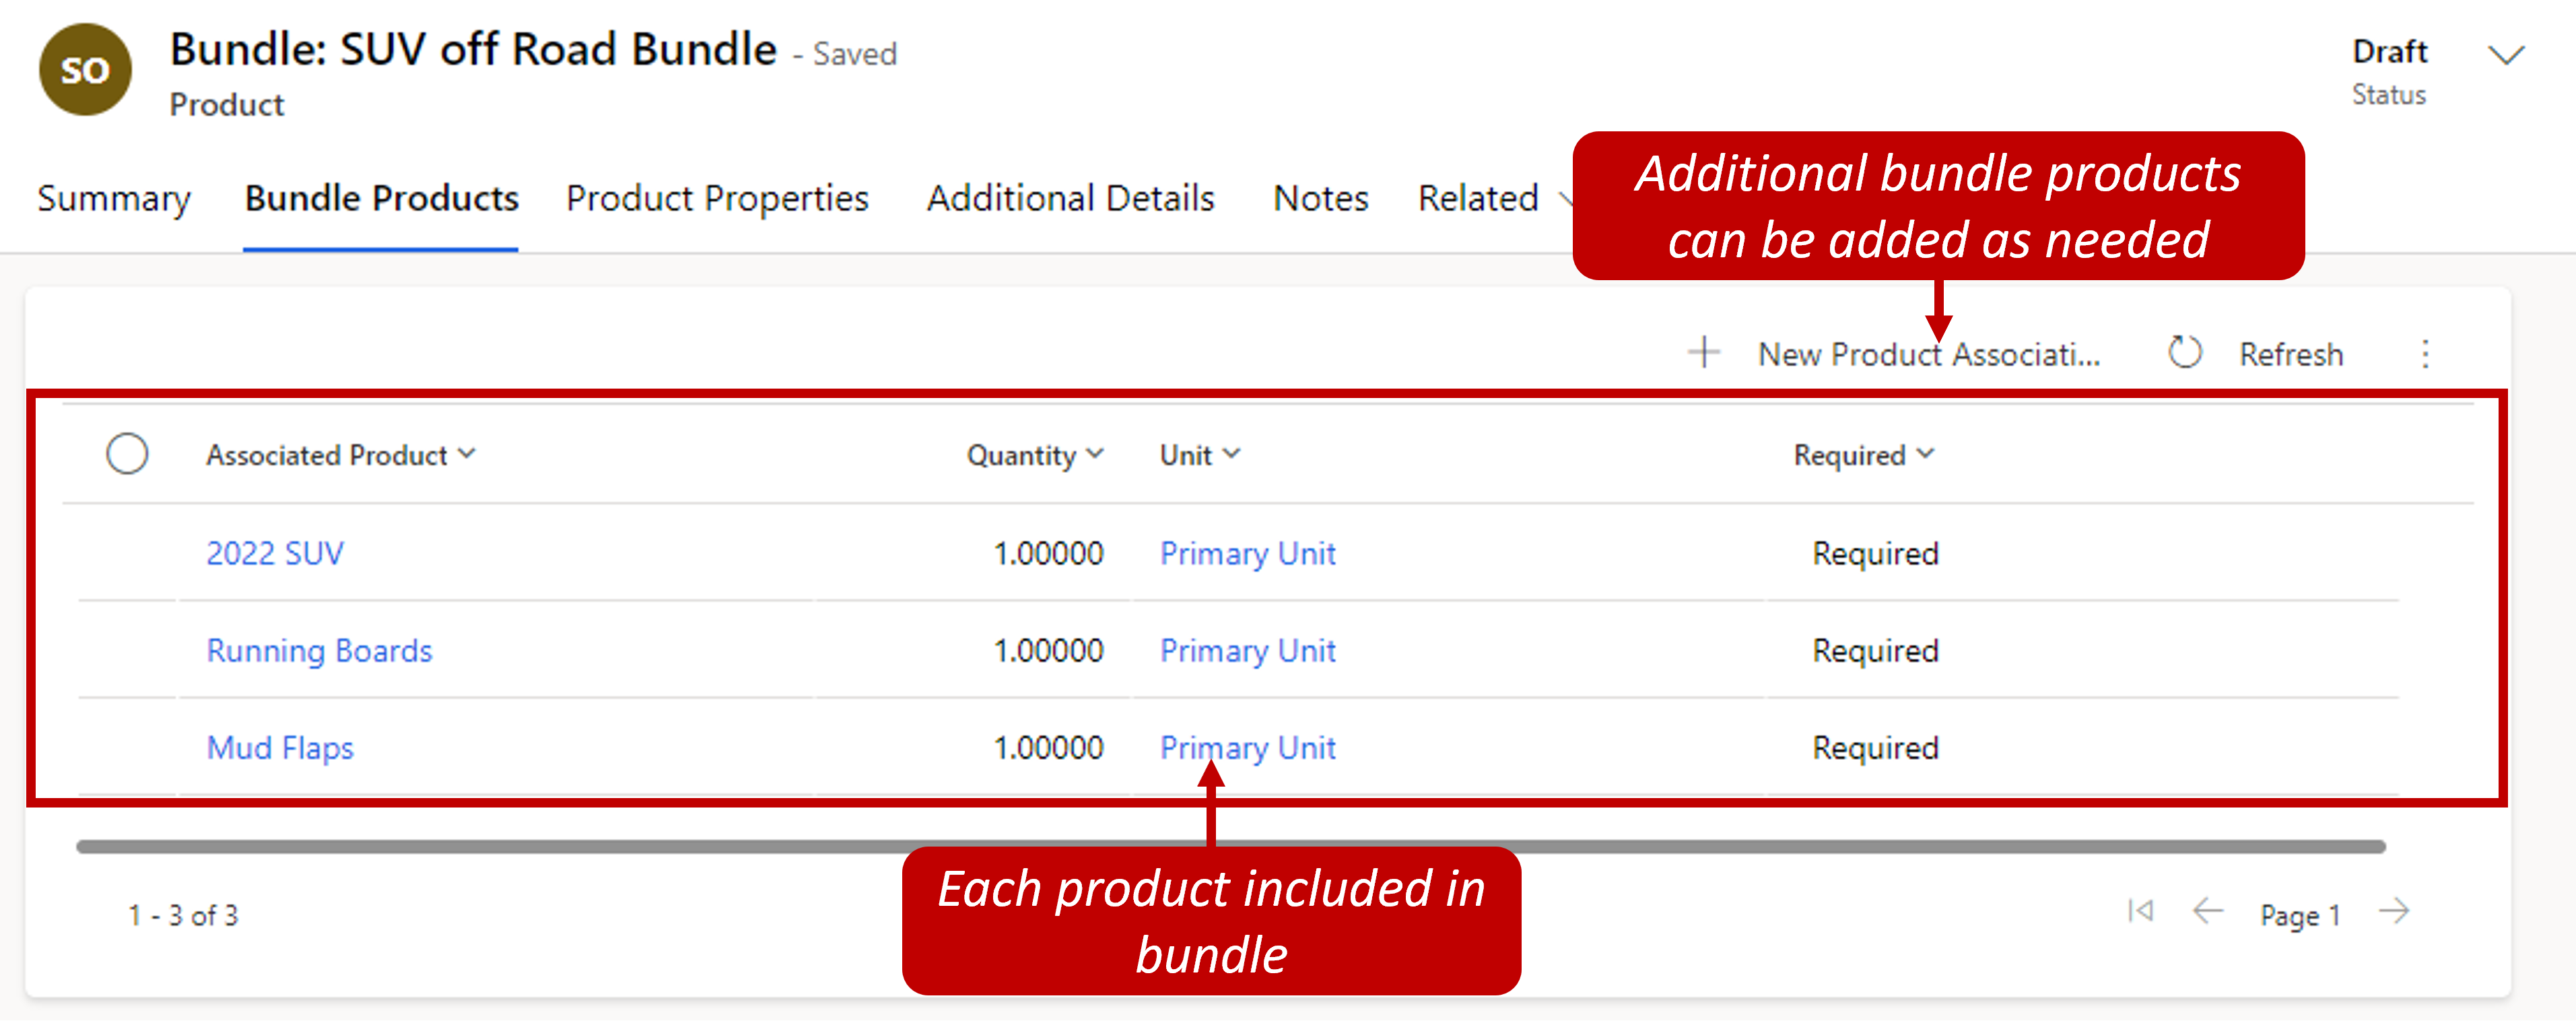 Product bundle. Additional bundle products can be added as needed. List shows each product included in the bundle.